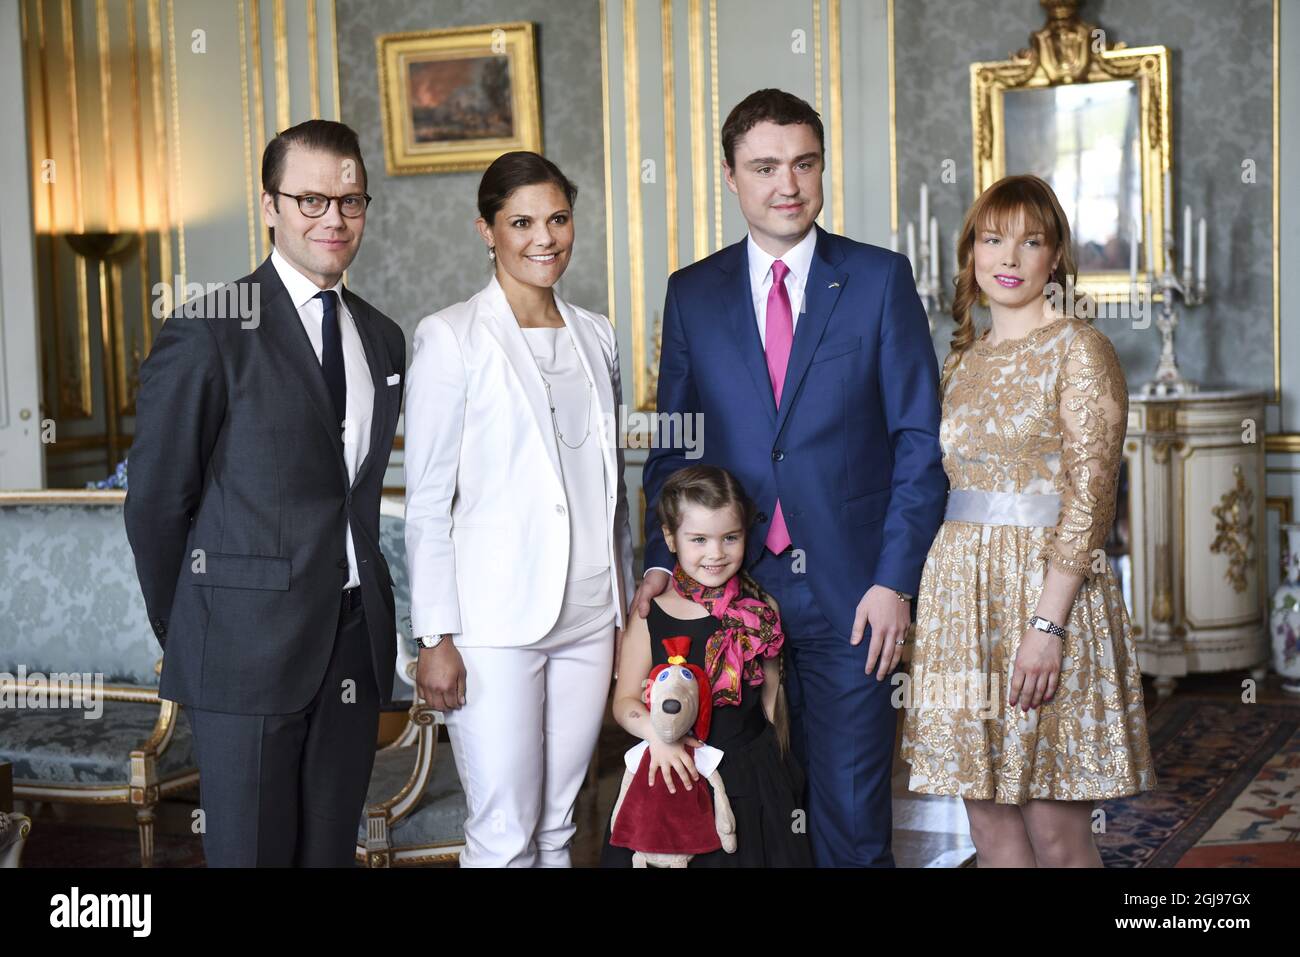 STOCKHOLM 2015-05-27 Swedish Crown Princess Victoria (2nd L) and Prince Daniel (L) during a reception for Estonian PM Taavi RÃµivas (2nd R), his daughter Miina RÃµivas (C) and 1st lady Luisa Vark at the Royal Palace in Stockholm, Sweden, May 27, 2015. RÃµivas visited Sweden for bilateral talks Wednesday. Photo Bertil Ericson / TT / Code 10000 ** SWEDEN OUT ** Stock Photo